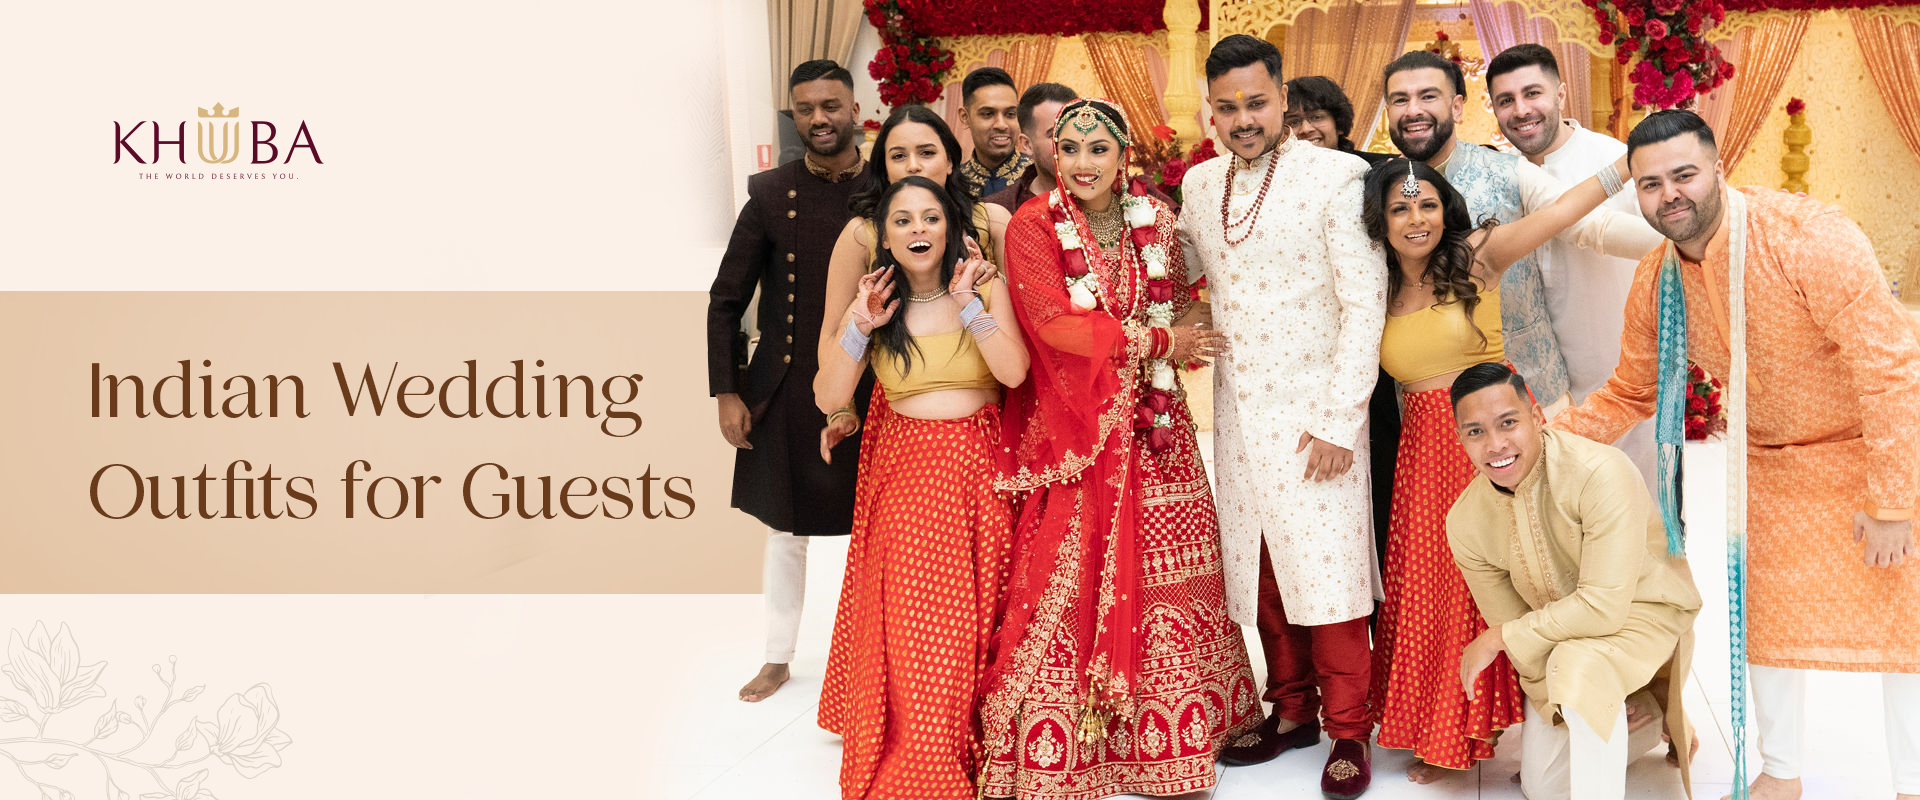 How To Integrate RED Colour in Your Wedding - #SSGoesColourful | Wedding  dresses men indian, Groom dress men, Groom outfit